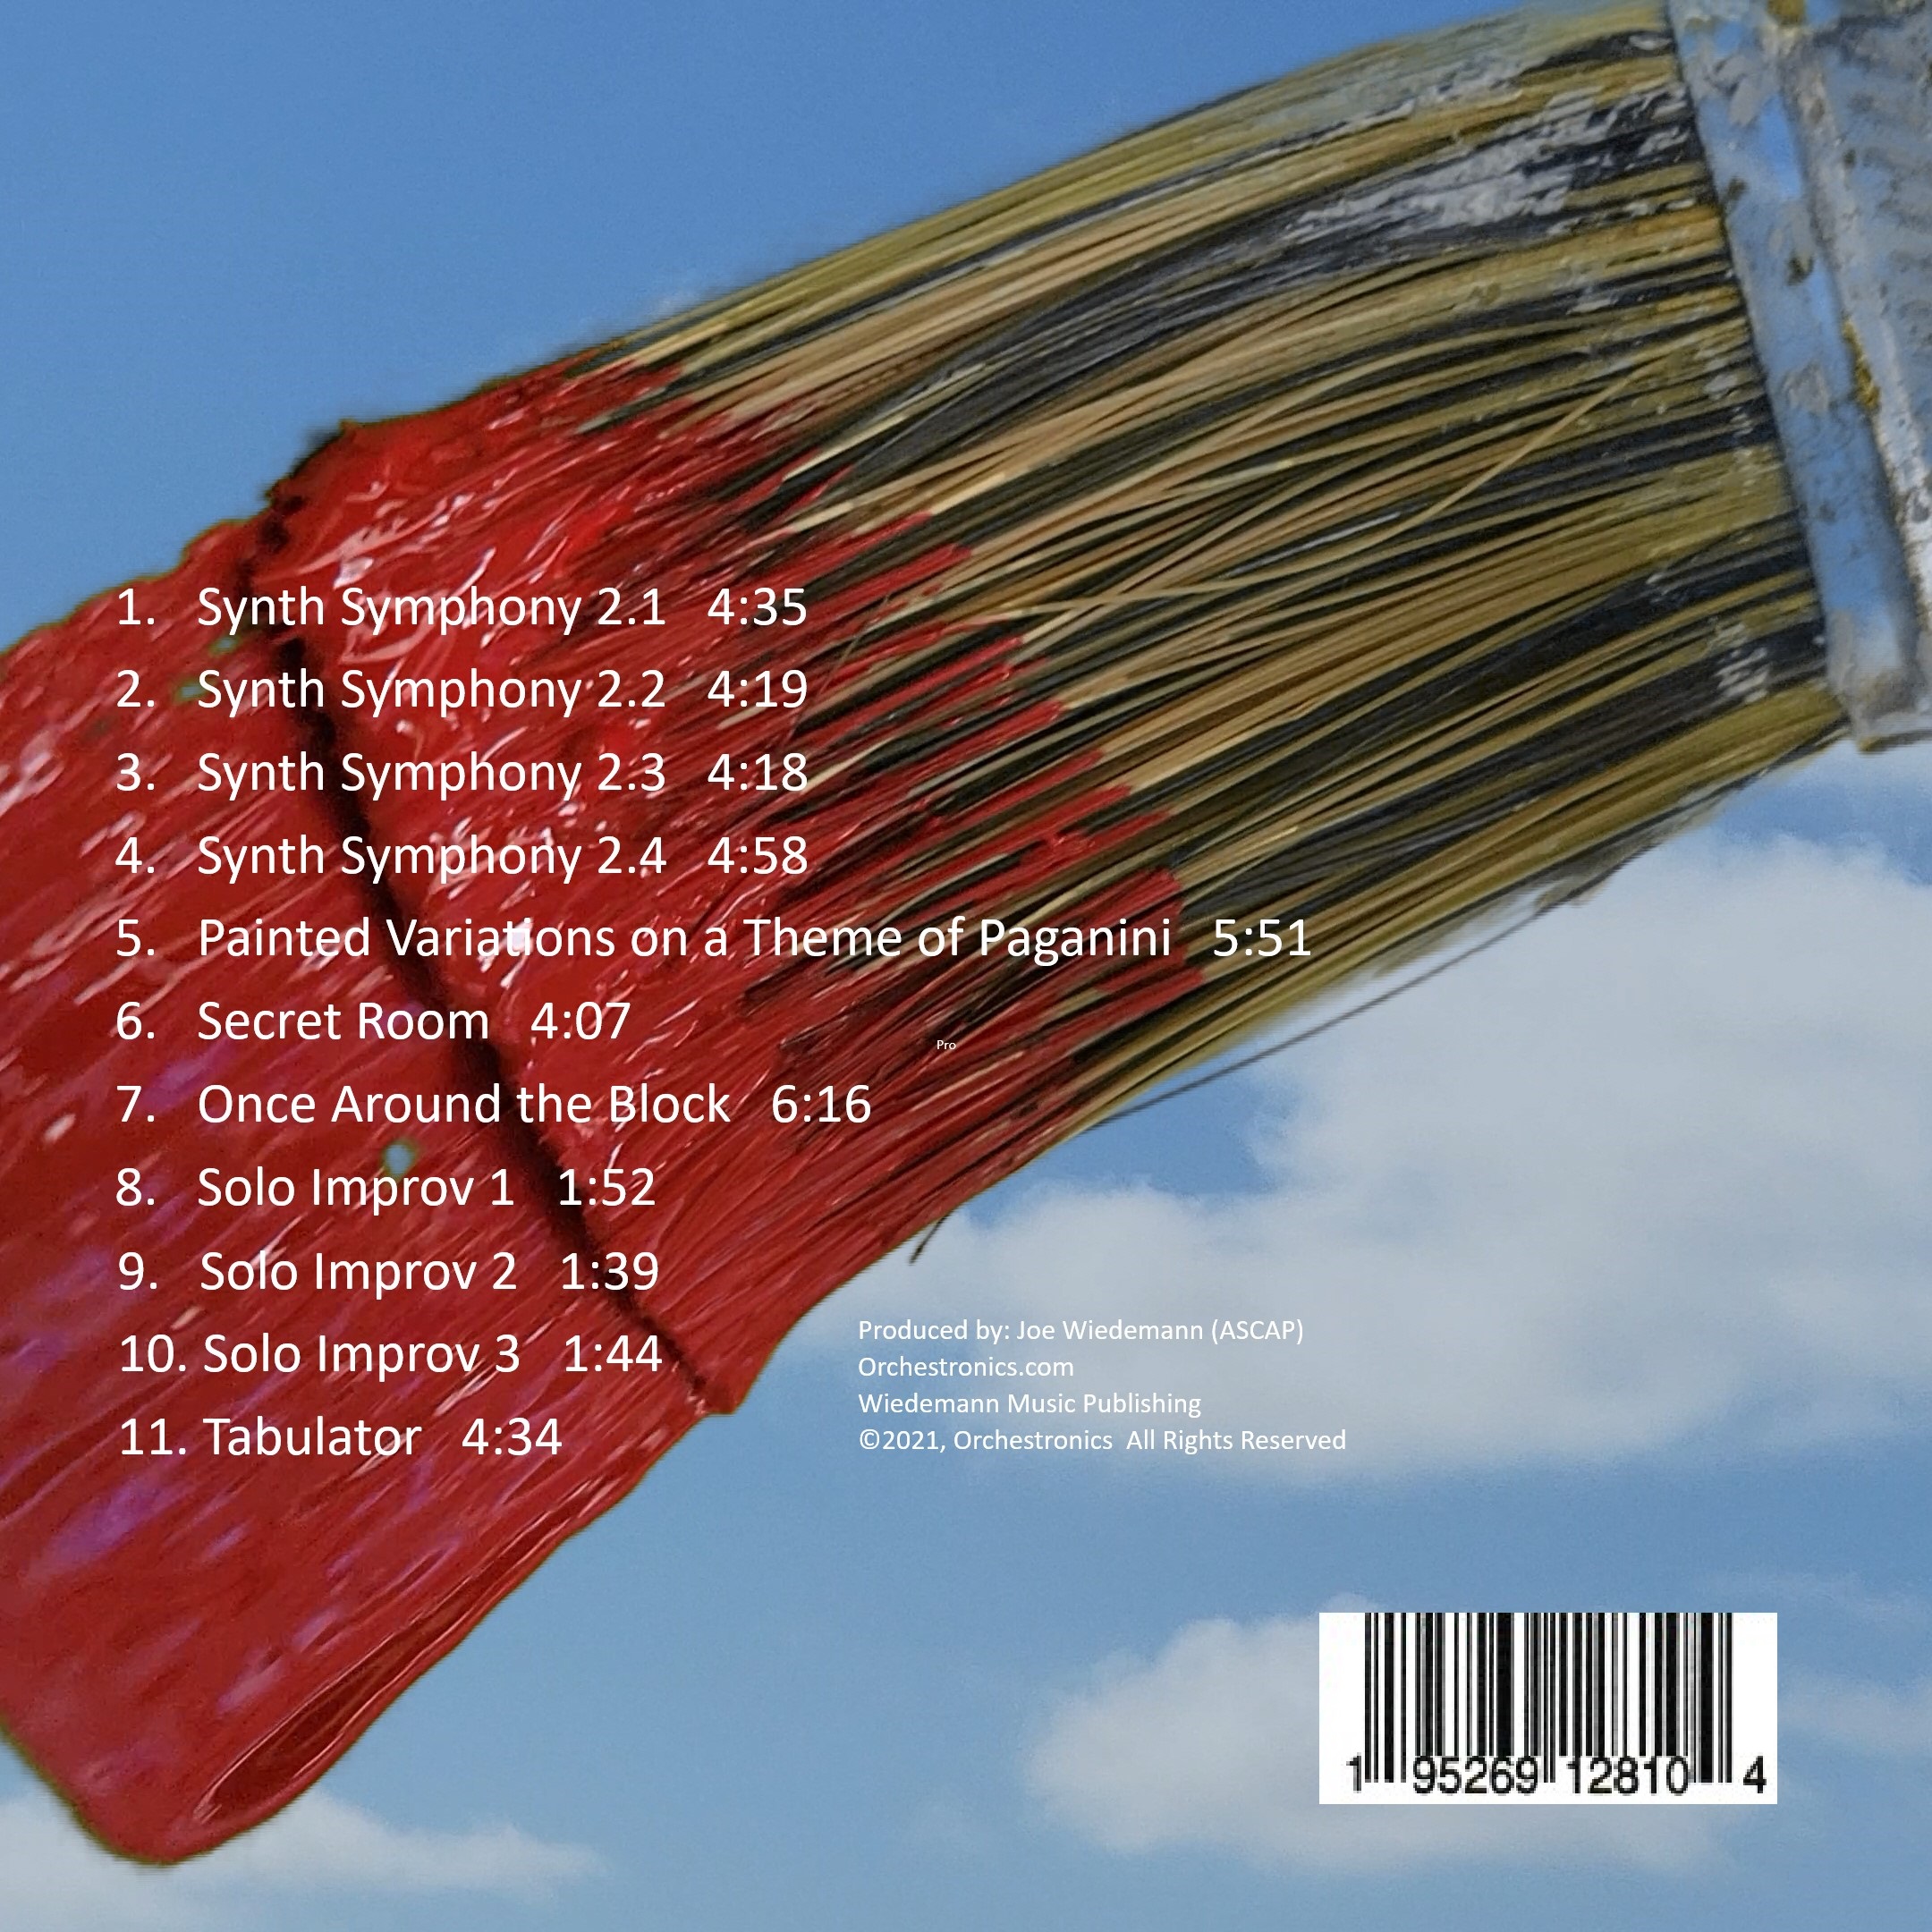 Painted Variations Back Cover